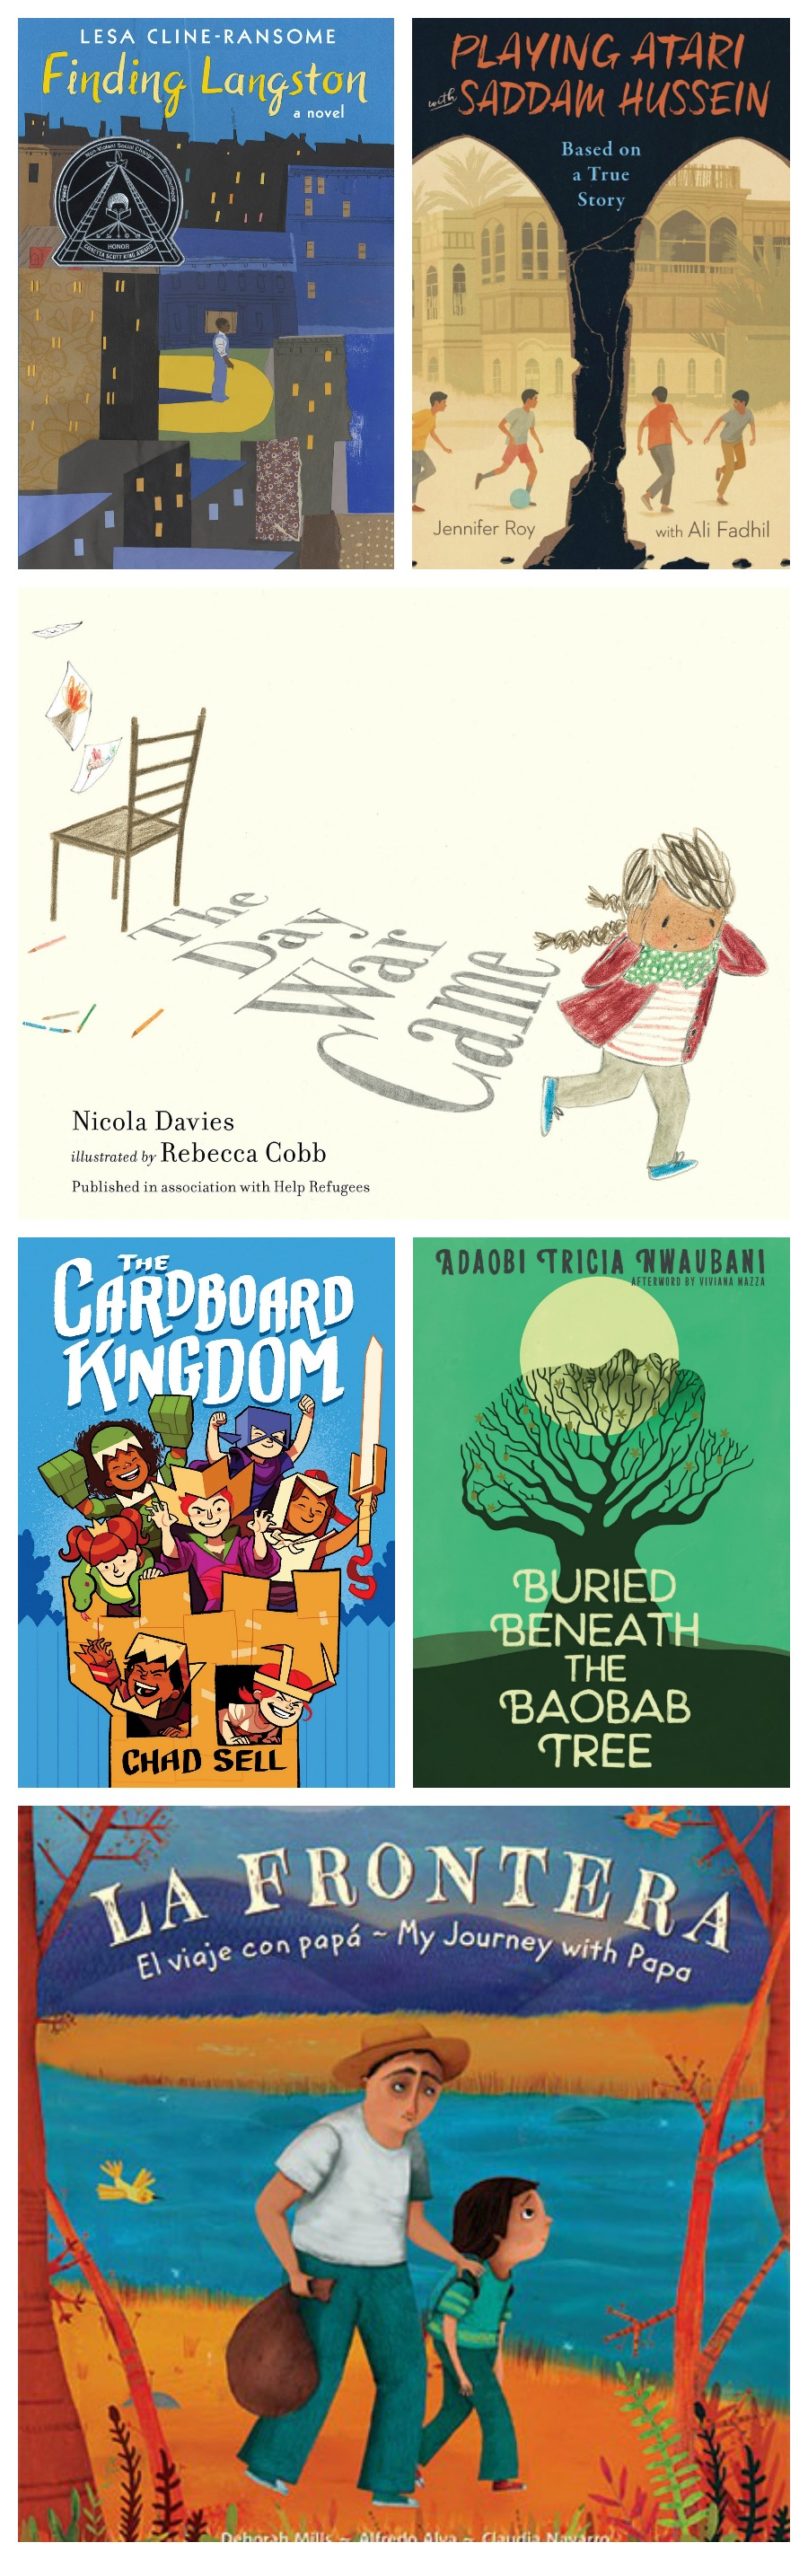 Best children's books of 2019: Children’s Literature & Reading Special Interest Group's selections